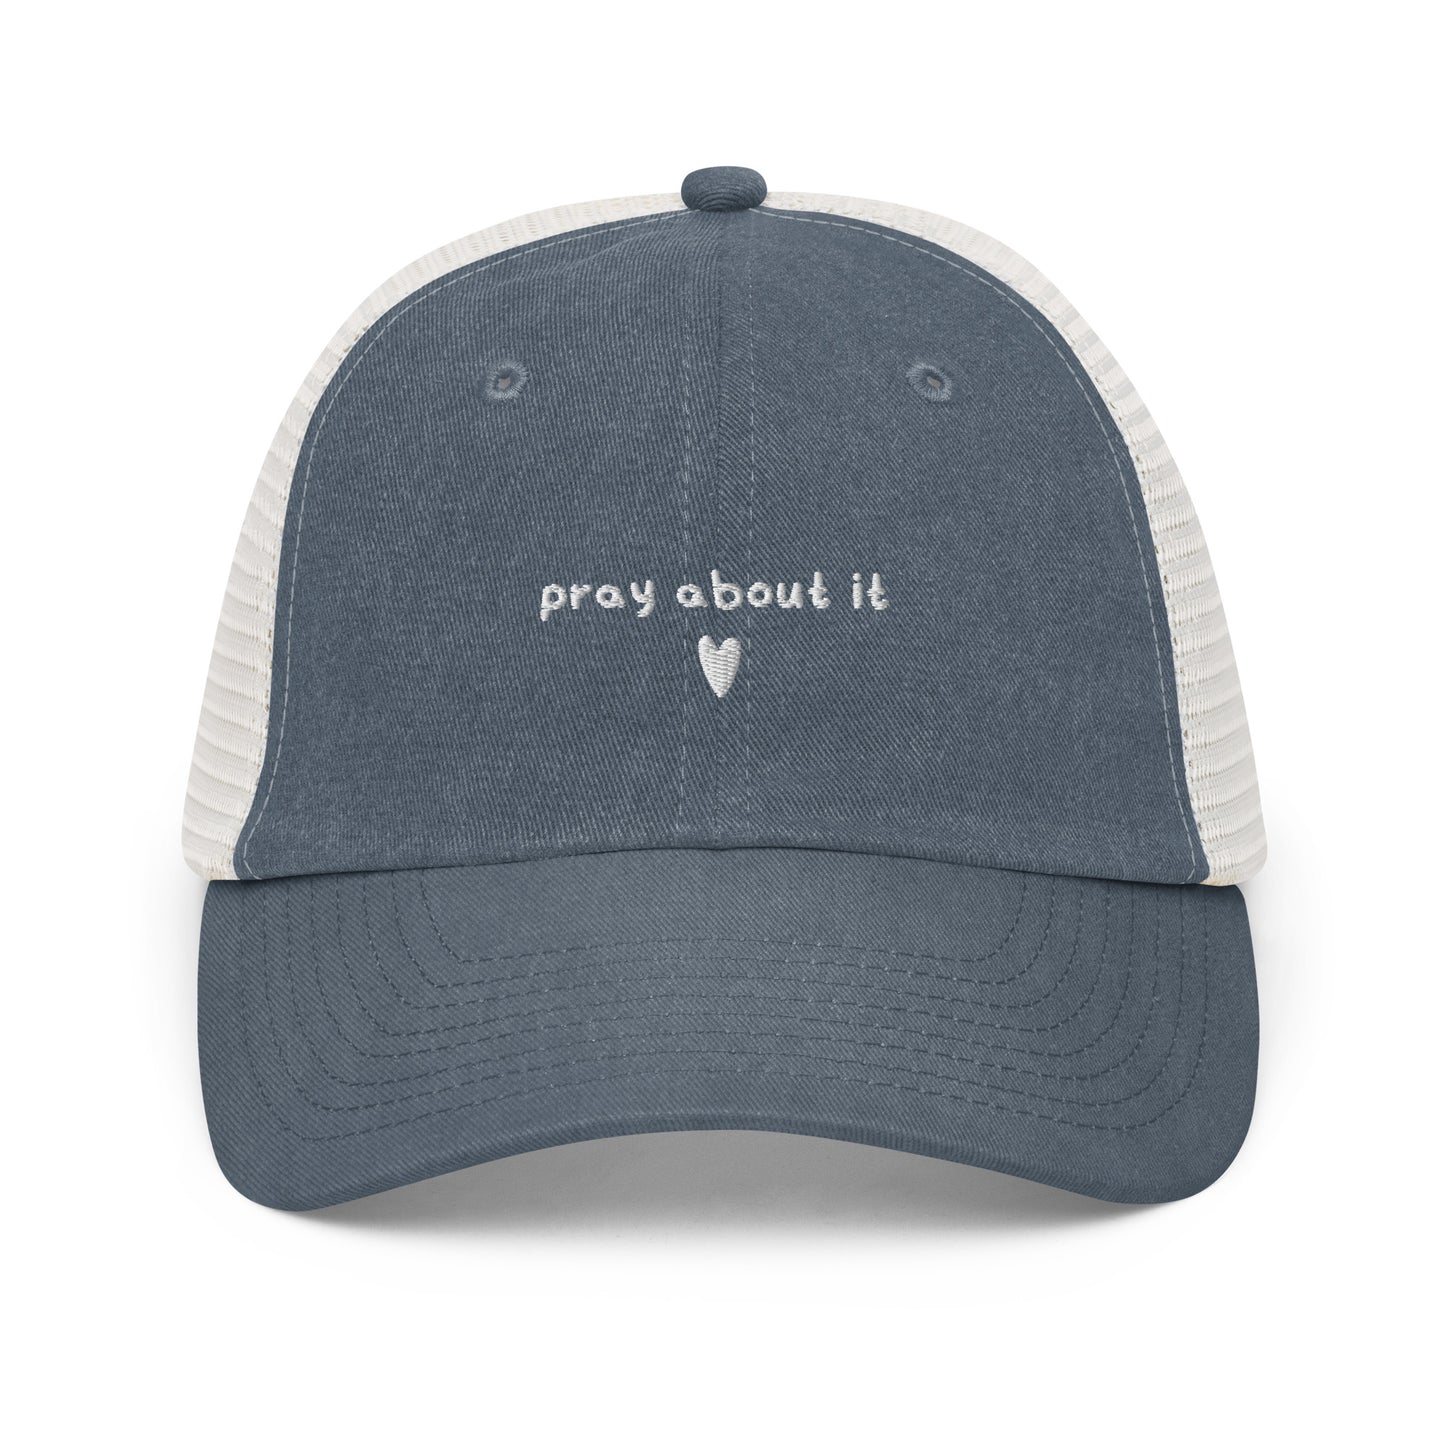 Embroidered 'pray about it' Vintage Baseball Cap